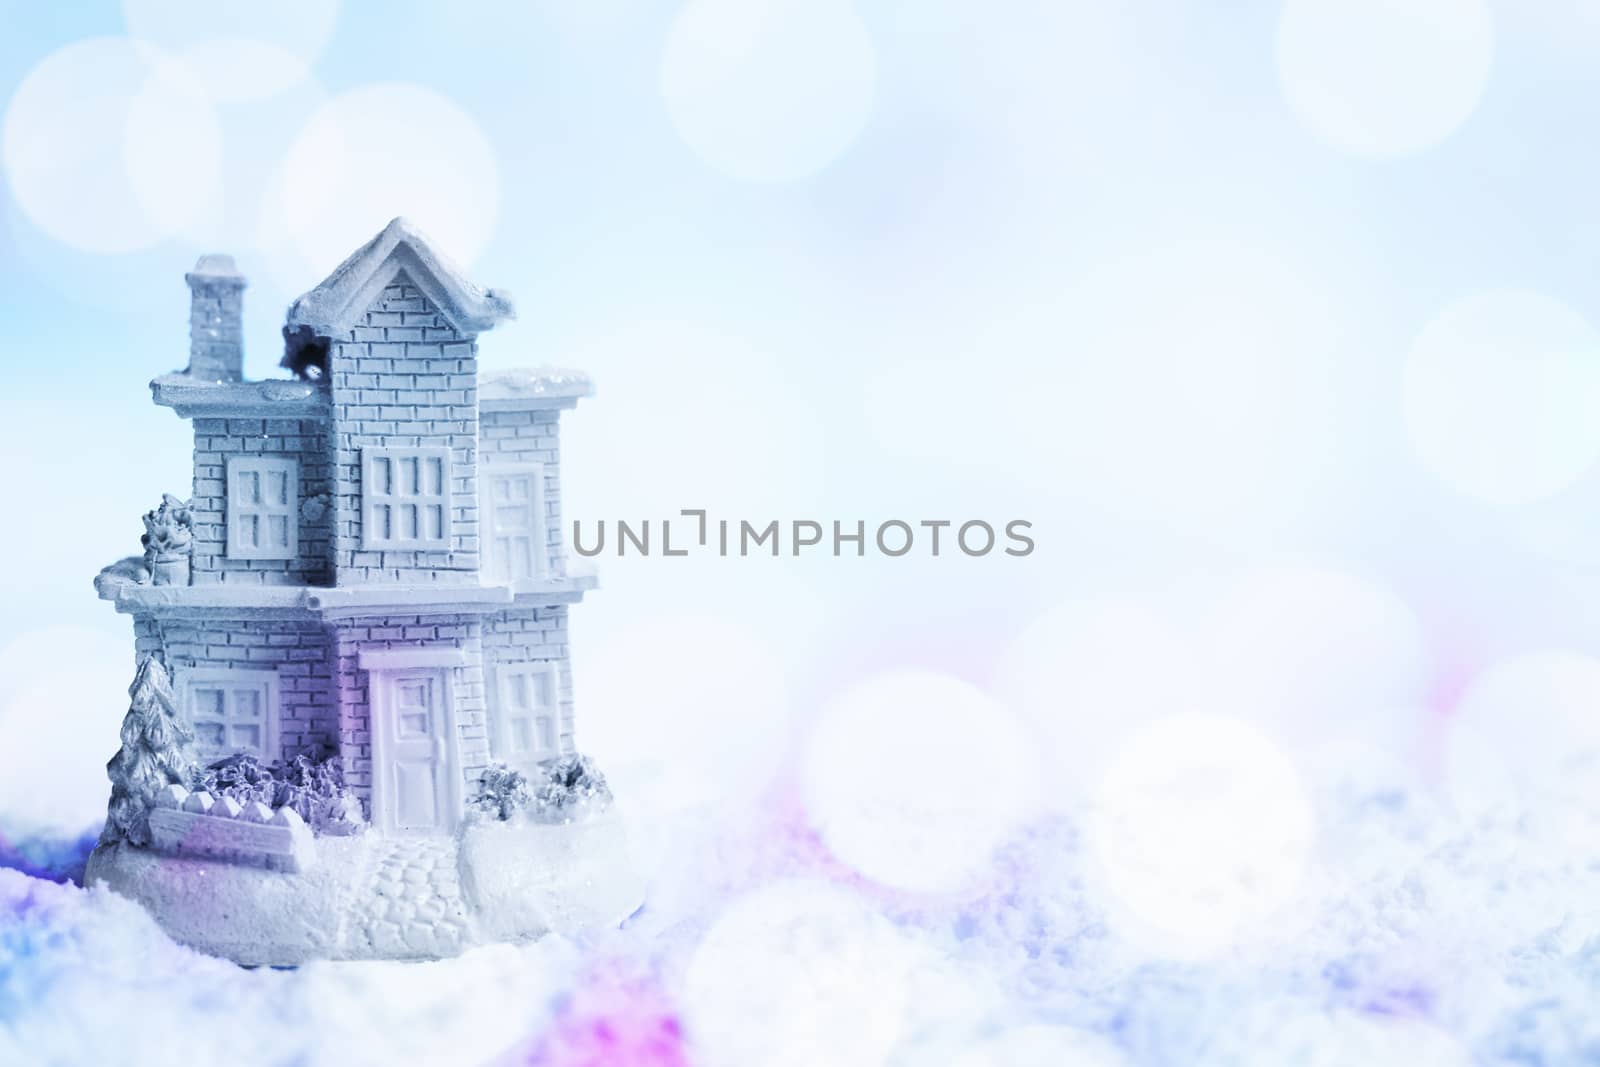 Snowy house in the snow. Winter background with colorful blue and purple shining bokeh effect. Copy space right. Shallow depth of field.